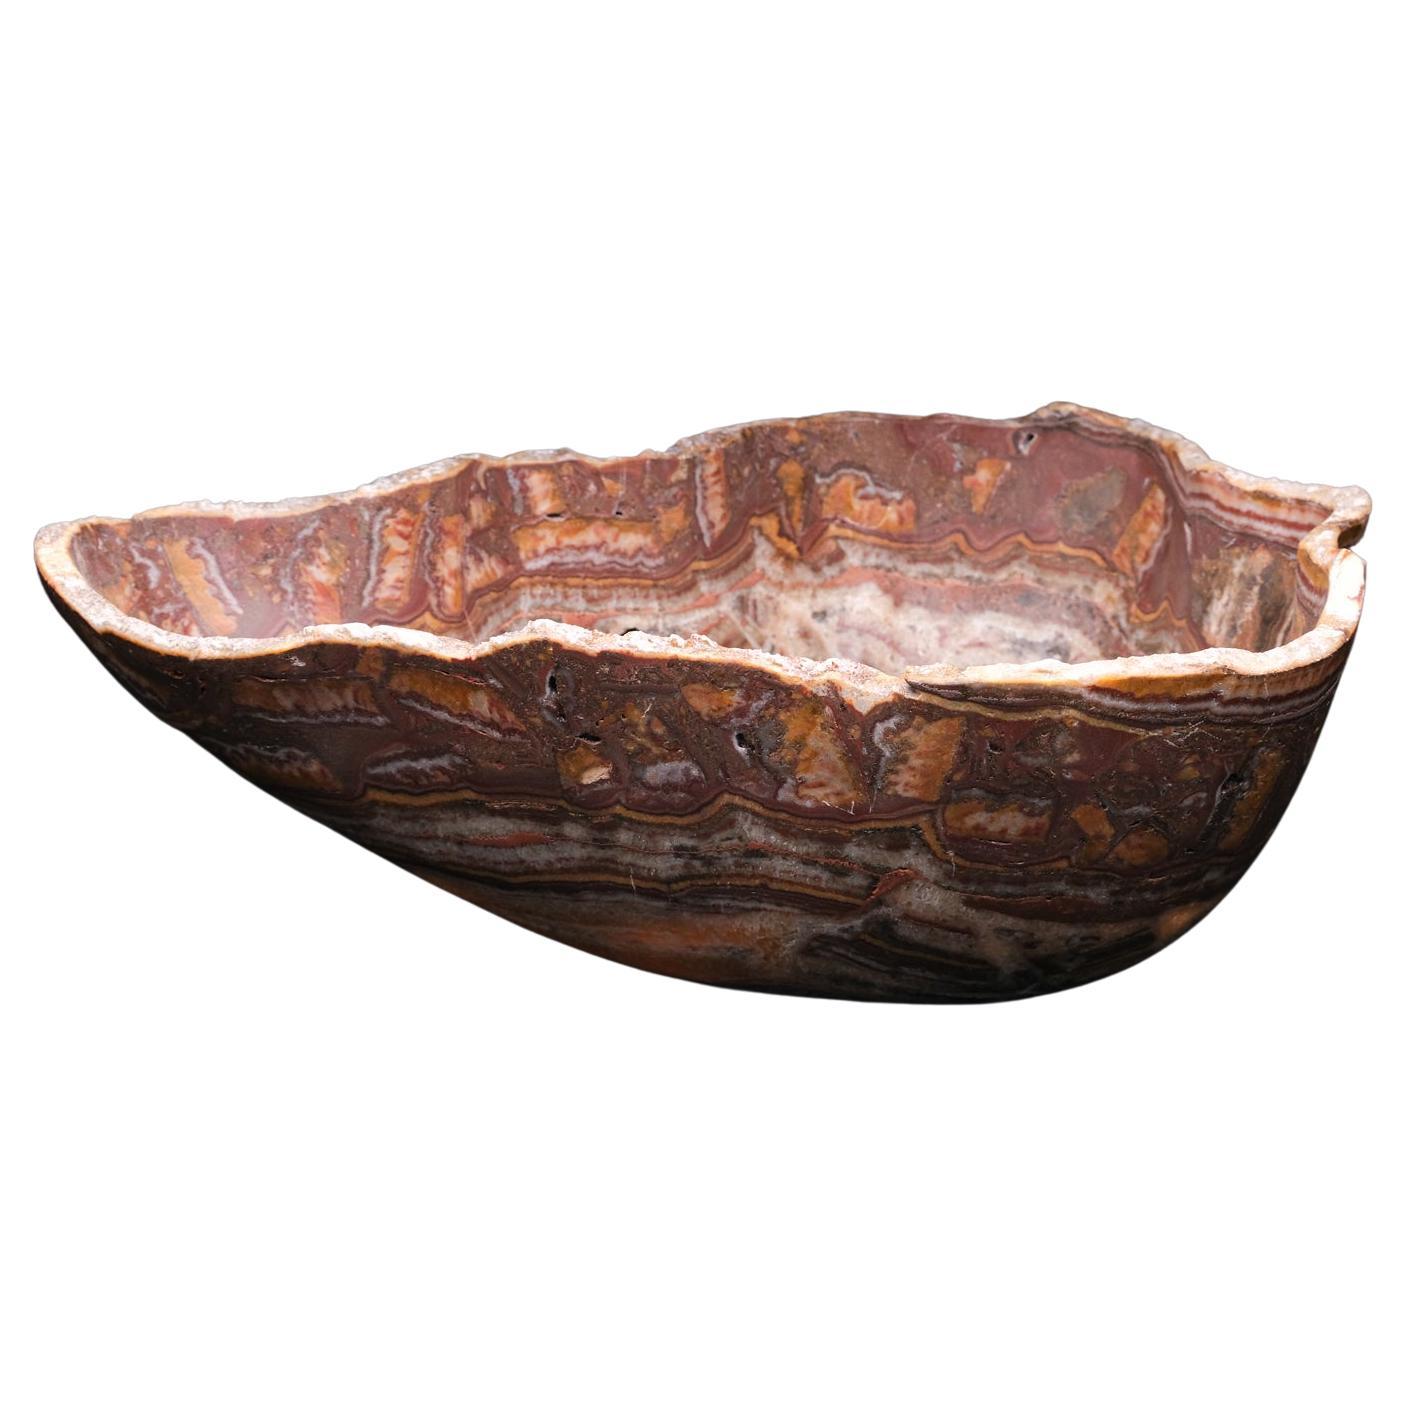  Polished Onyx Bowl from Mexico (14.4 Lbs)